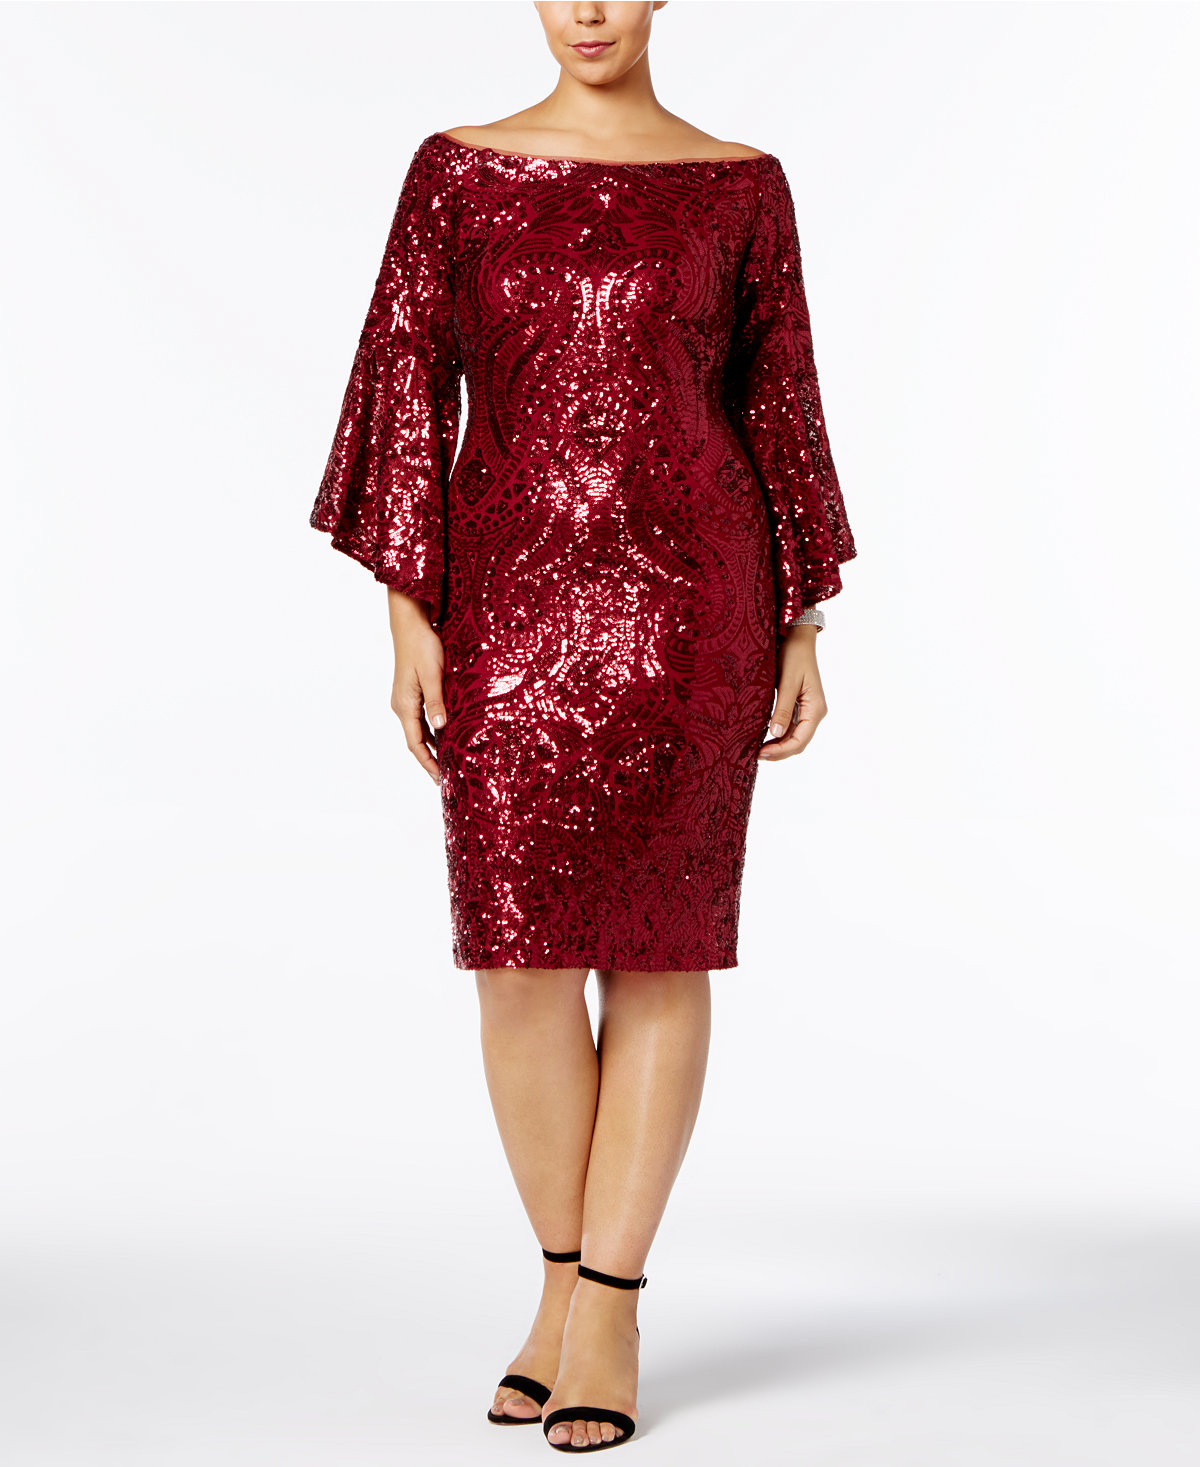 https://www.macys.com/shop/product/betsy-adam-plus-size-sequined-bell-sleeve-dress?ID=5236772&CategoryID=37038#fn=sp%3D6%26spc%3D1100%26ruleId%3D87%7CBOOST%20SAVED%20SET%7CBOOST%20ATTRIBUTE%26searchPass%3DmatchNone%26slotId%3D69